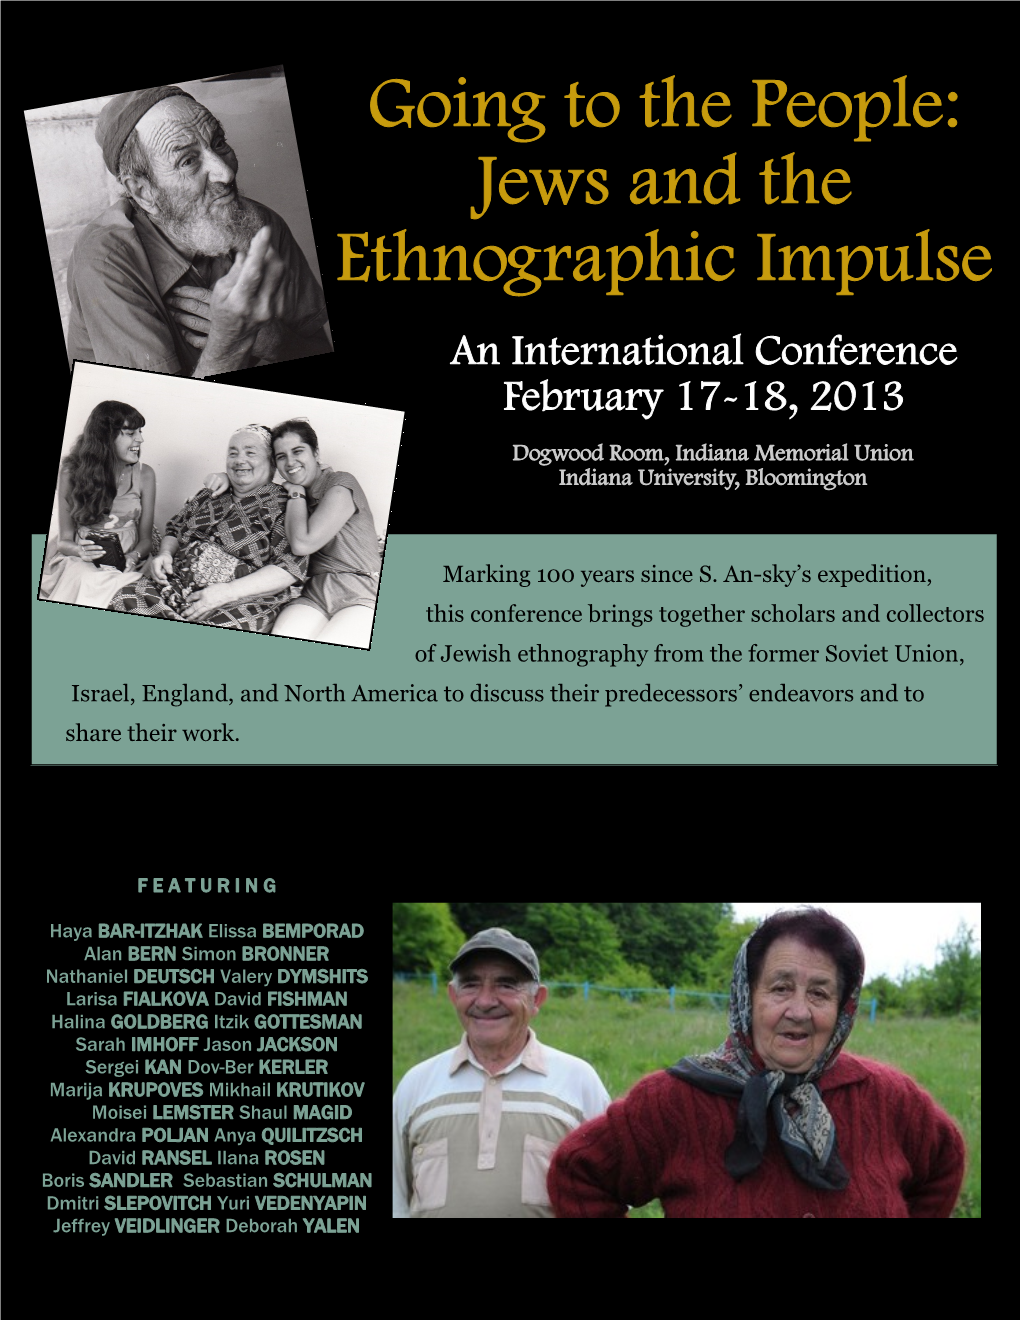 Jews and the Ethnographic Impulse an International Conference February 17-18, 2013 Dogwood Room, Indiana Memorial Union Indiana University, Bloomington